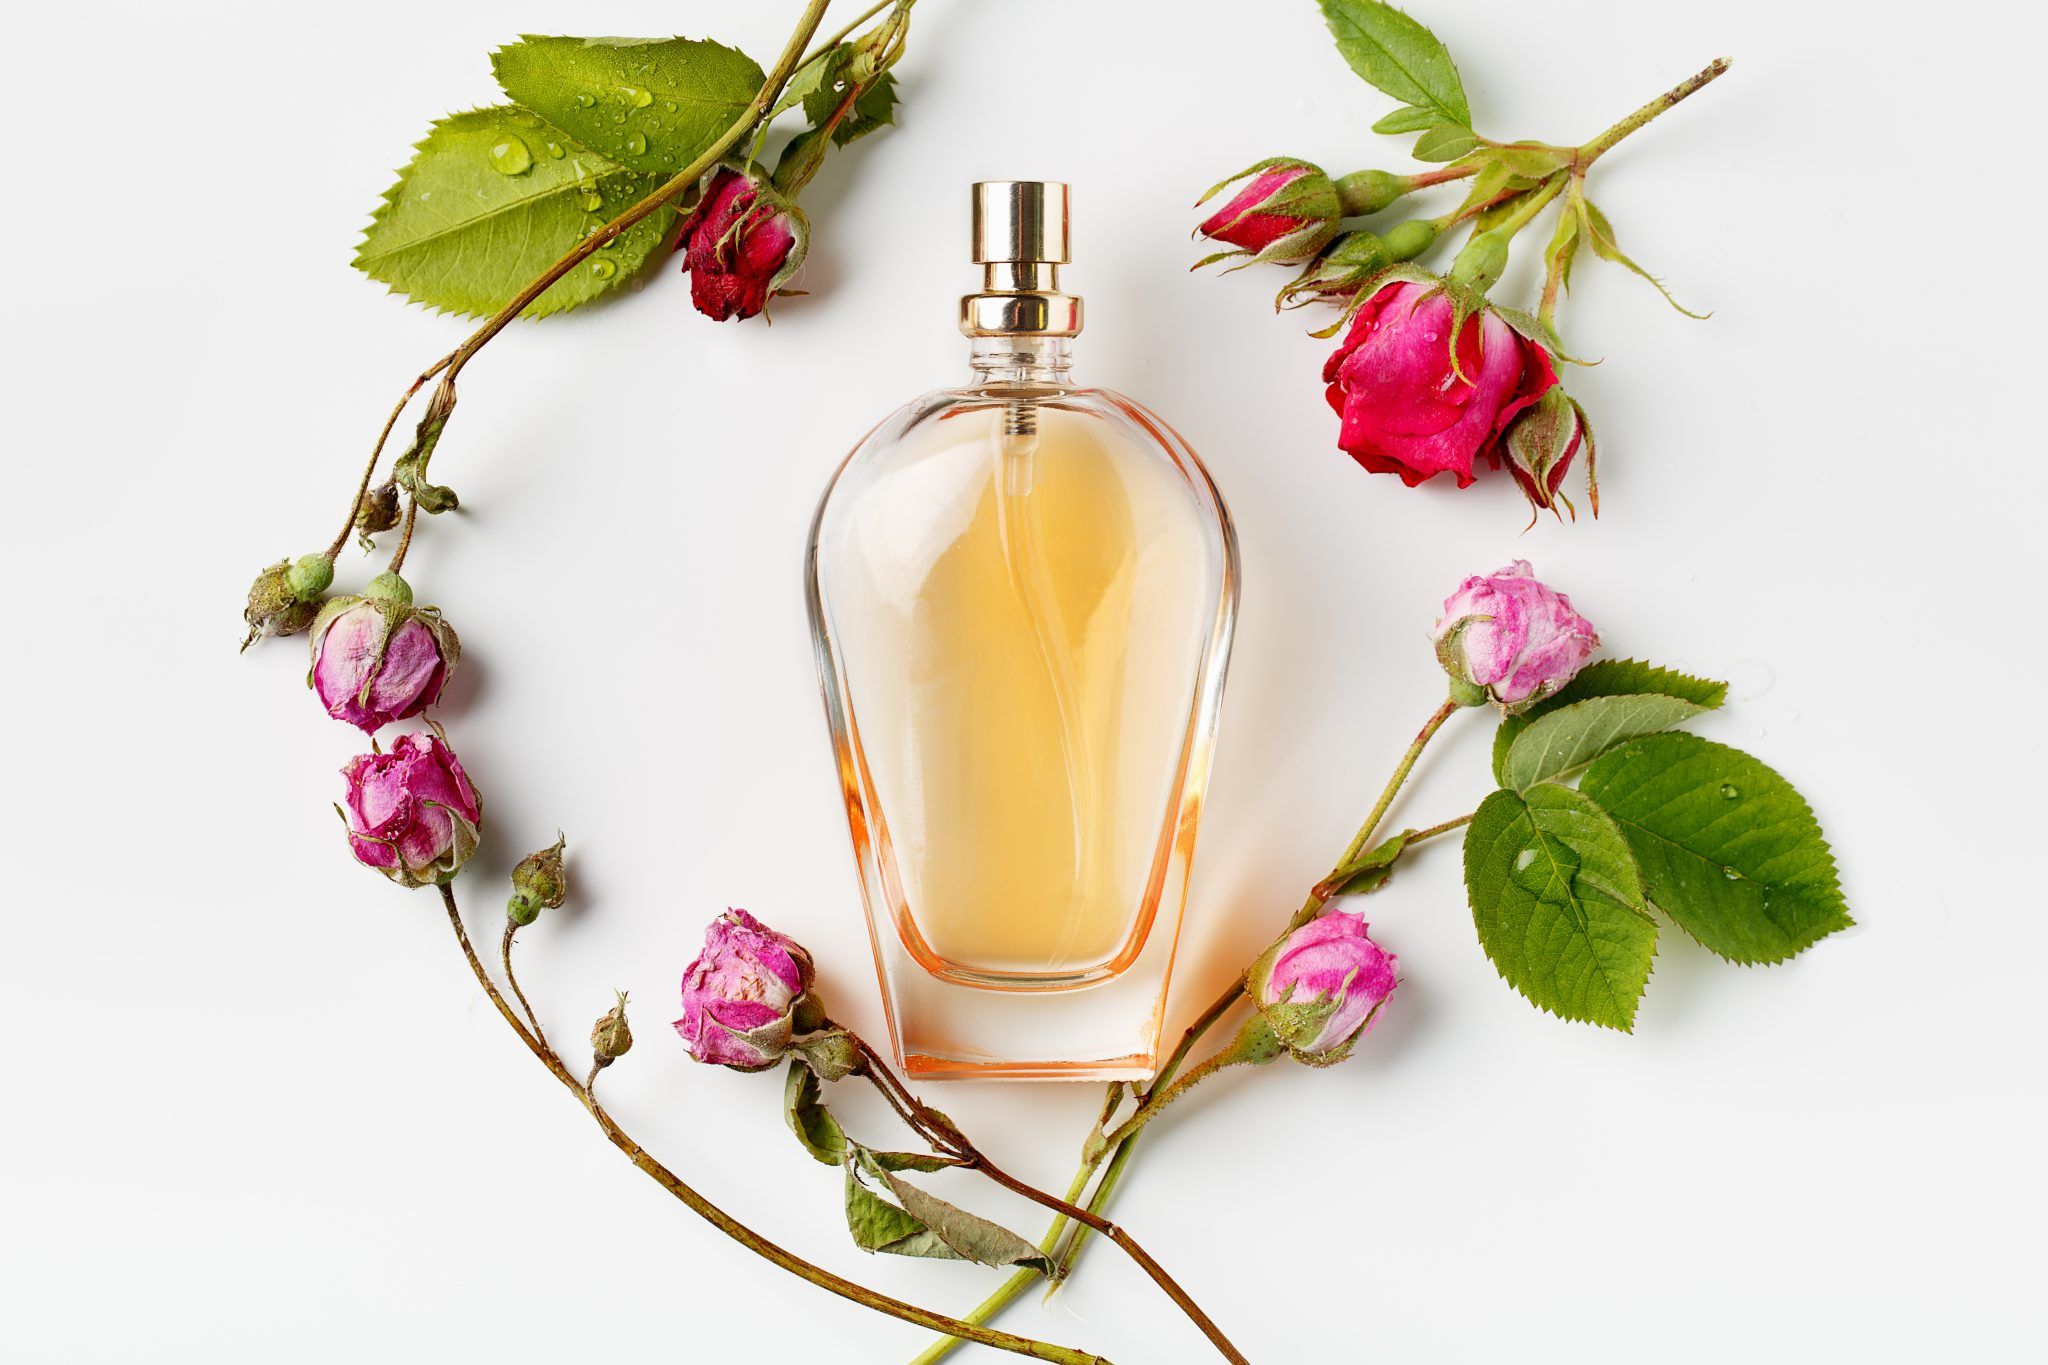 The 10 Most Appealing Fragrance Brands for China Right Now